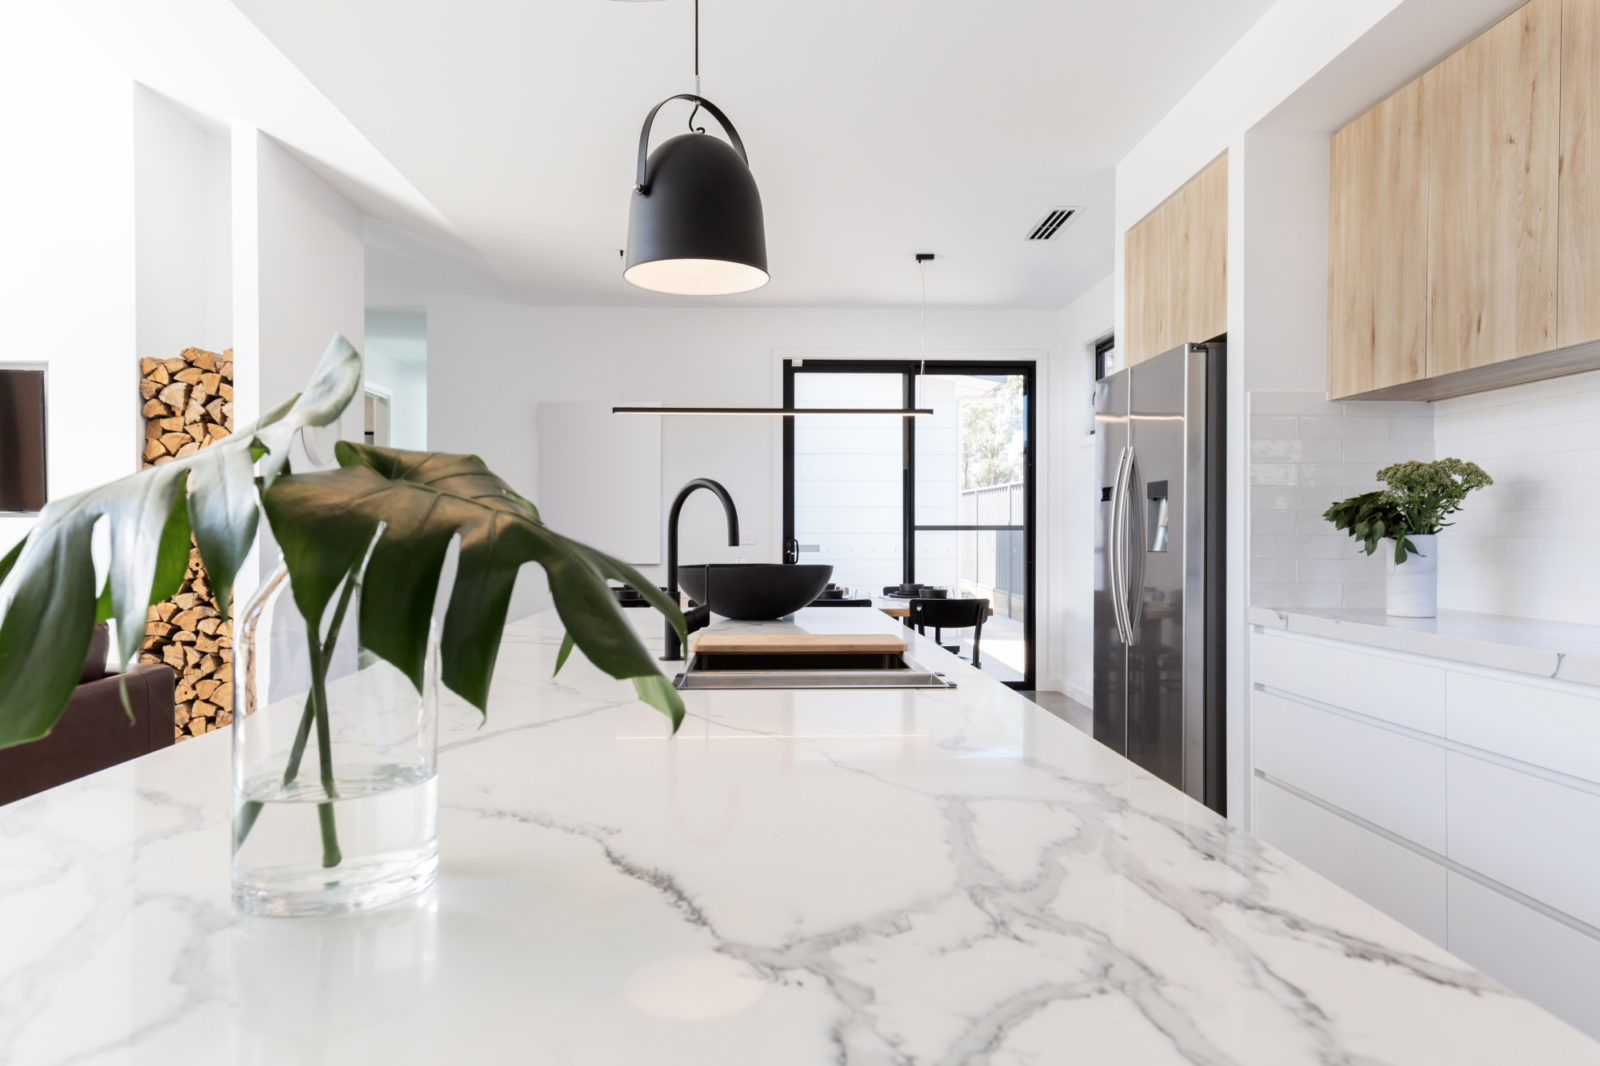 8 Reasons Why Marble Counters In The Kitchen Are A Great Idea